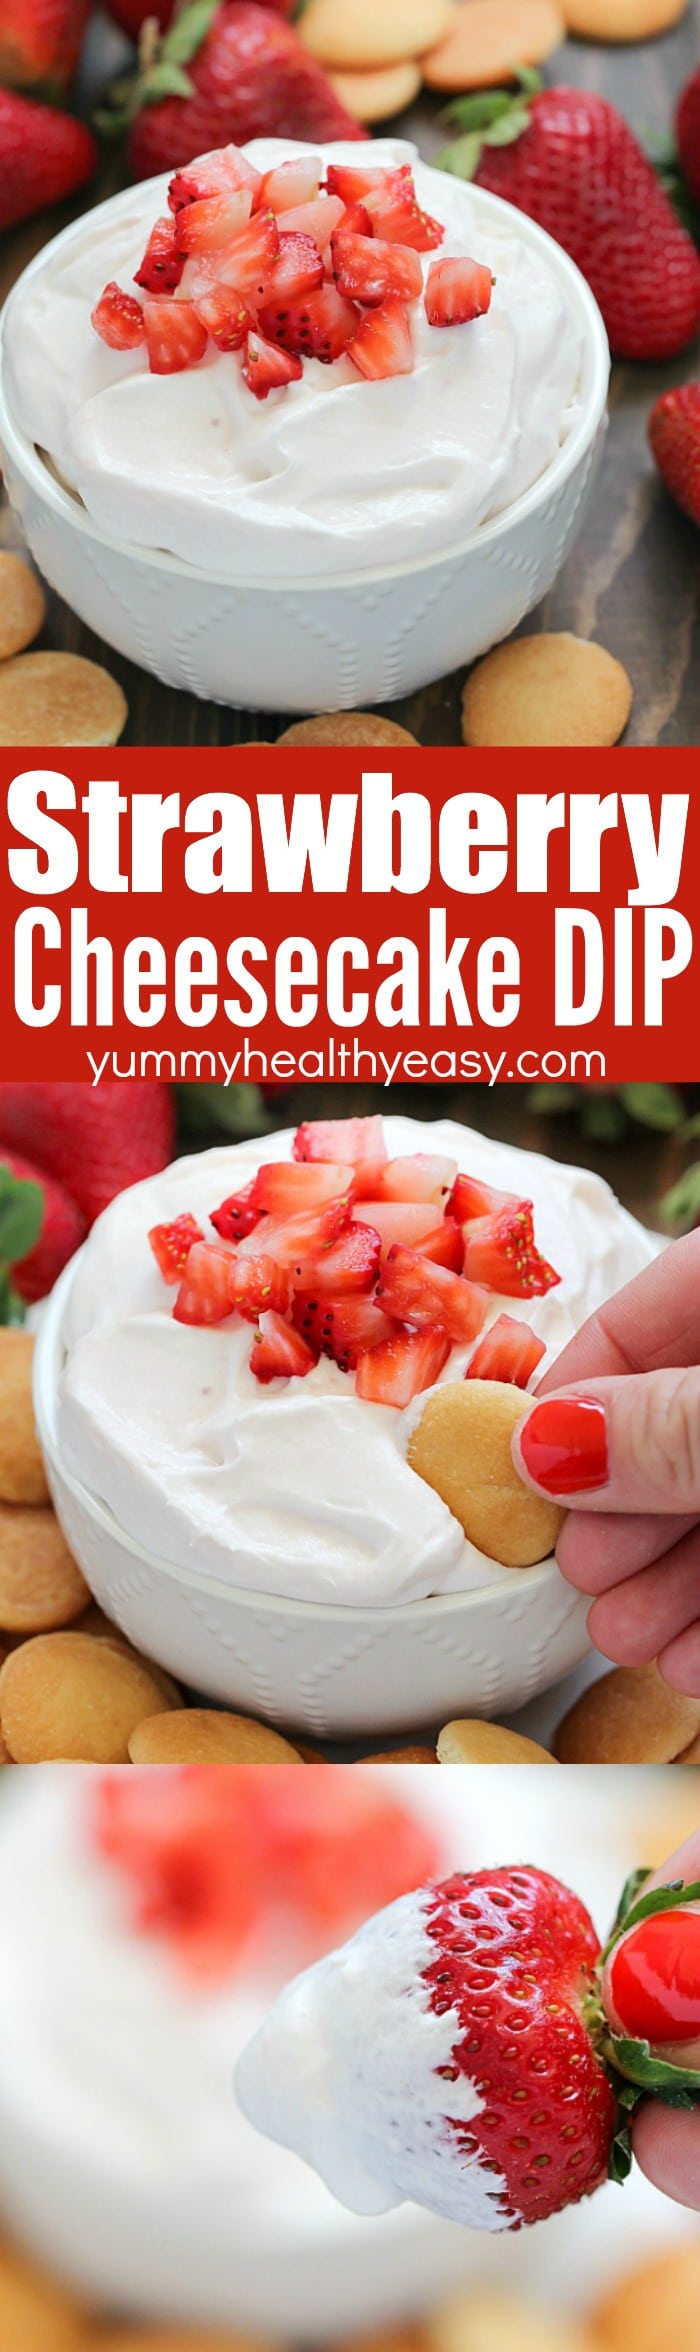 This Strawberry Cheesecake Dip is a creamy fruit dip that's full of strawberry cheesecake flavors but without all the calories of traditional cheesecake! #dessert #dip #strawberries #light #easydip via @jennikolaus